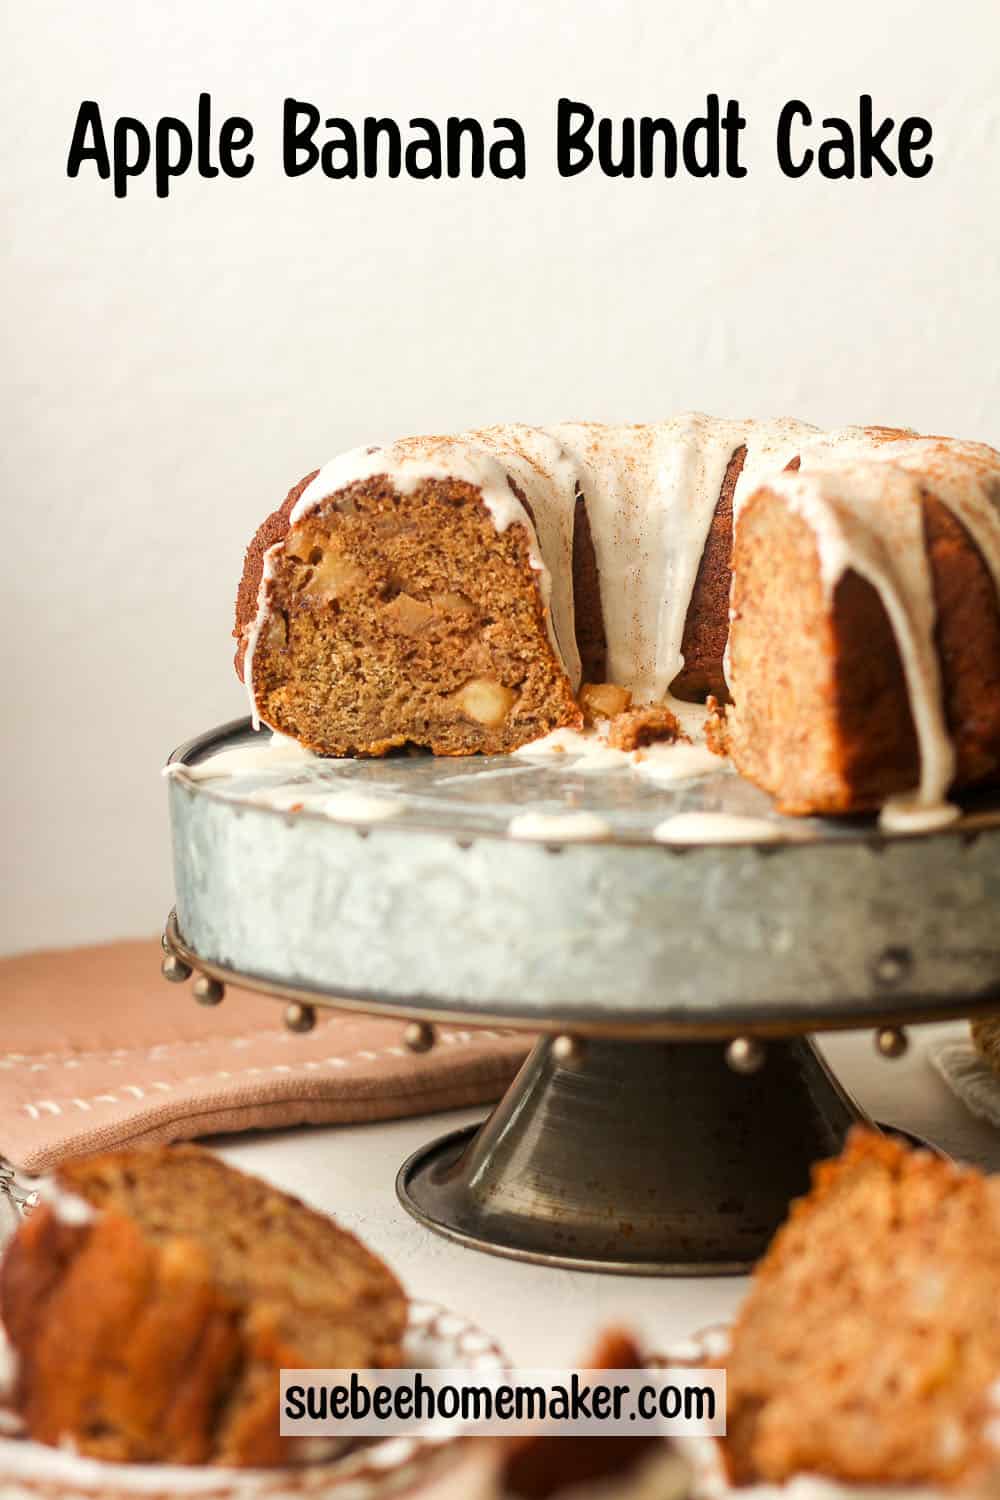 A silver cake stand with a partial apple banana bundt cake with cinnamon glaze.